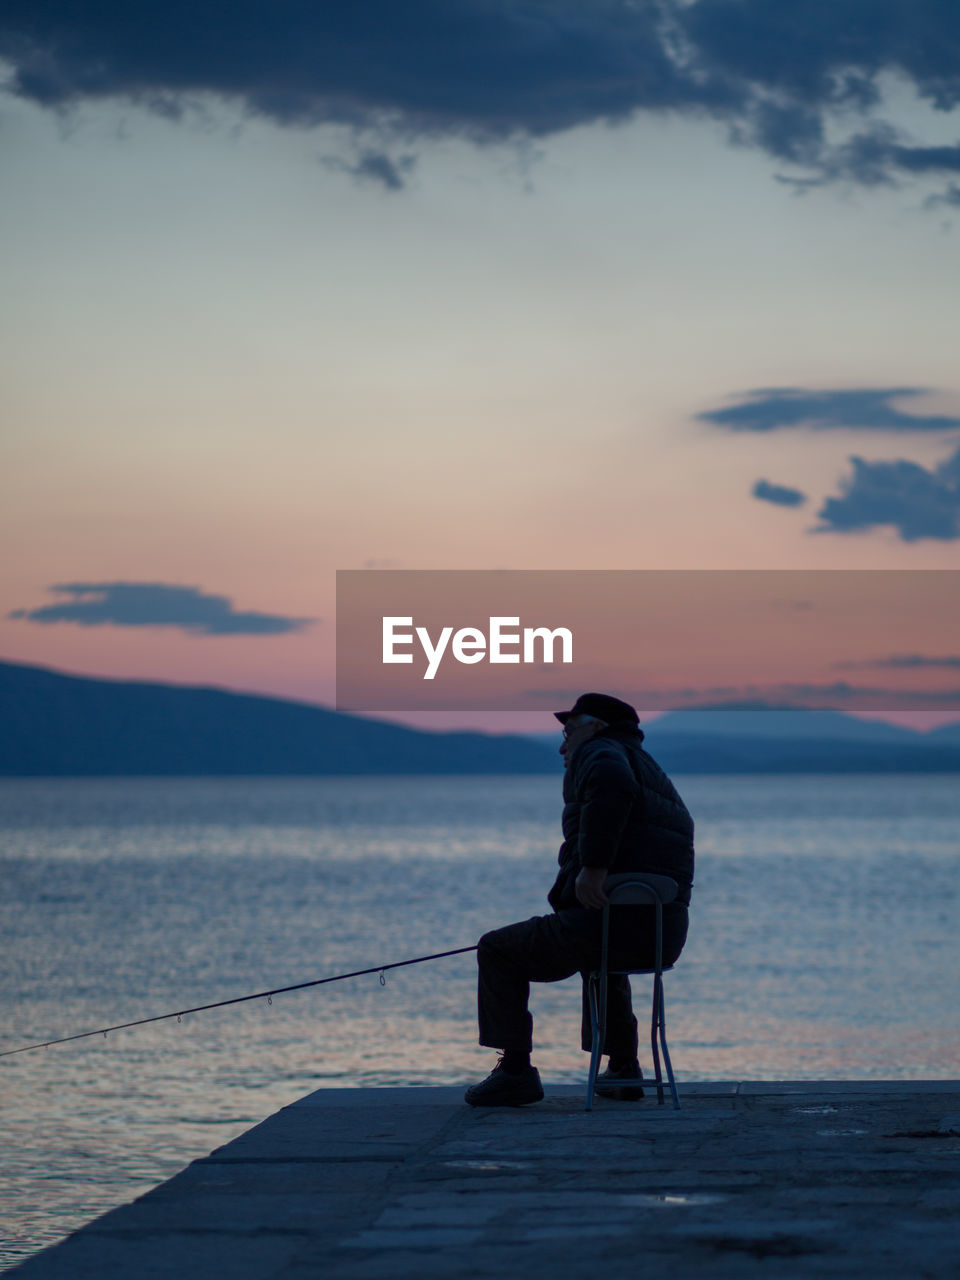 Man sitting on shore against sky during sunset